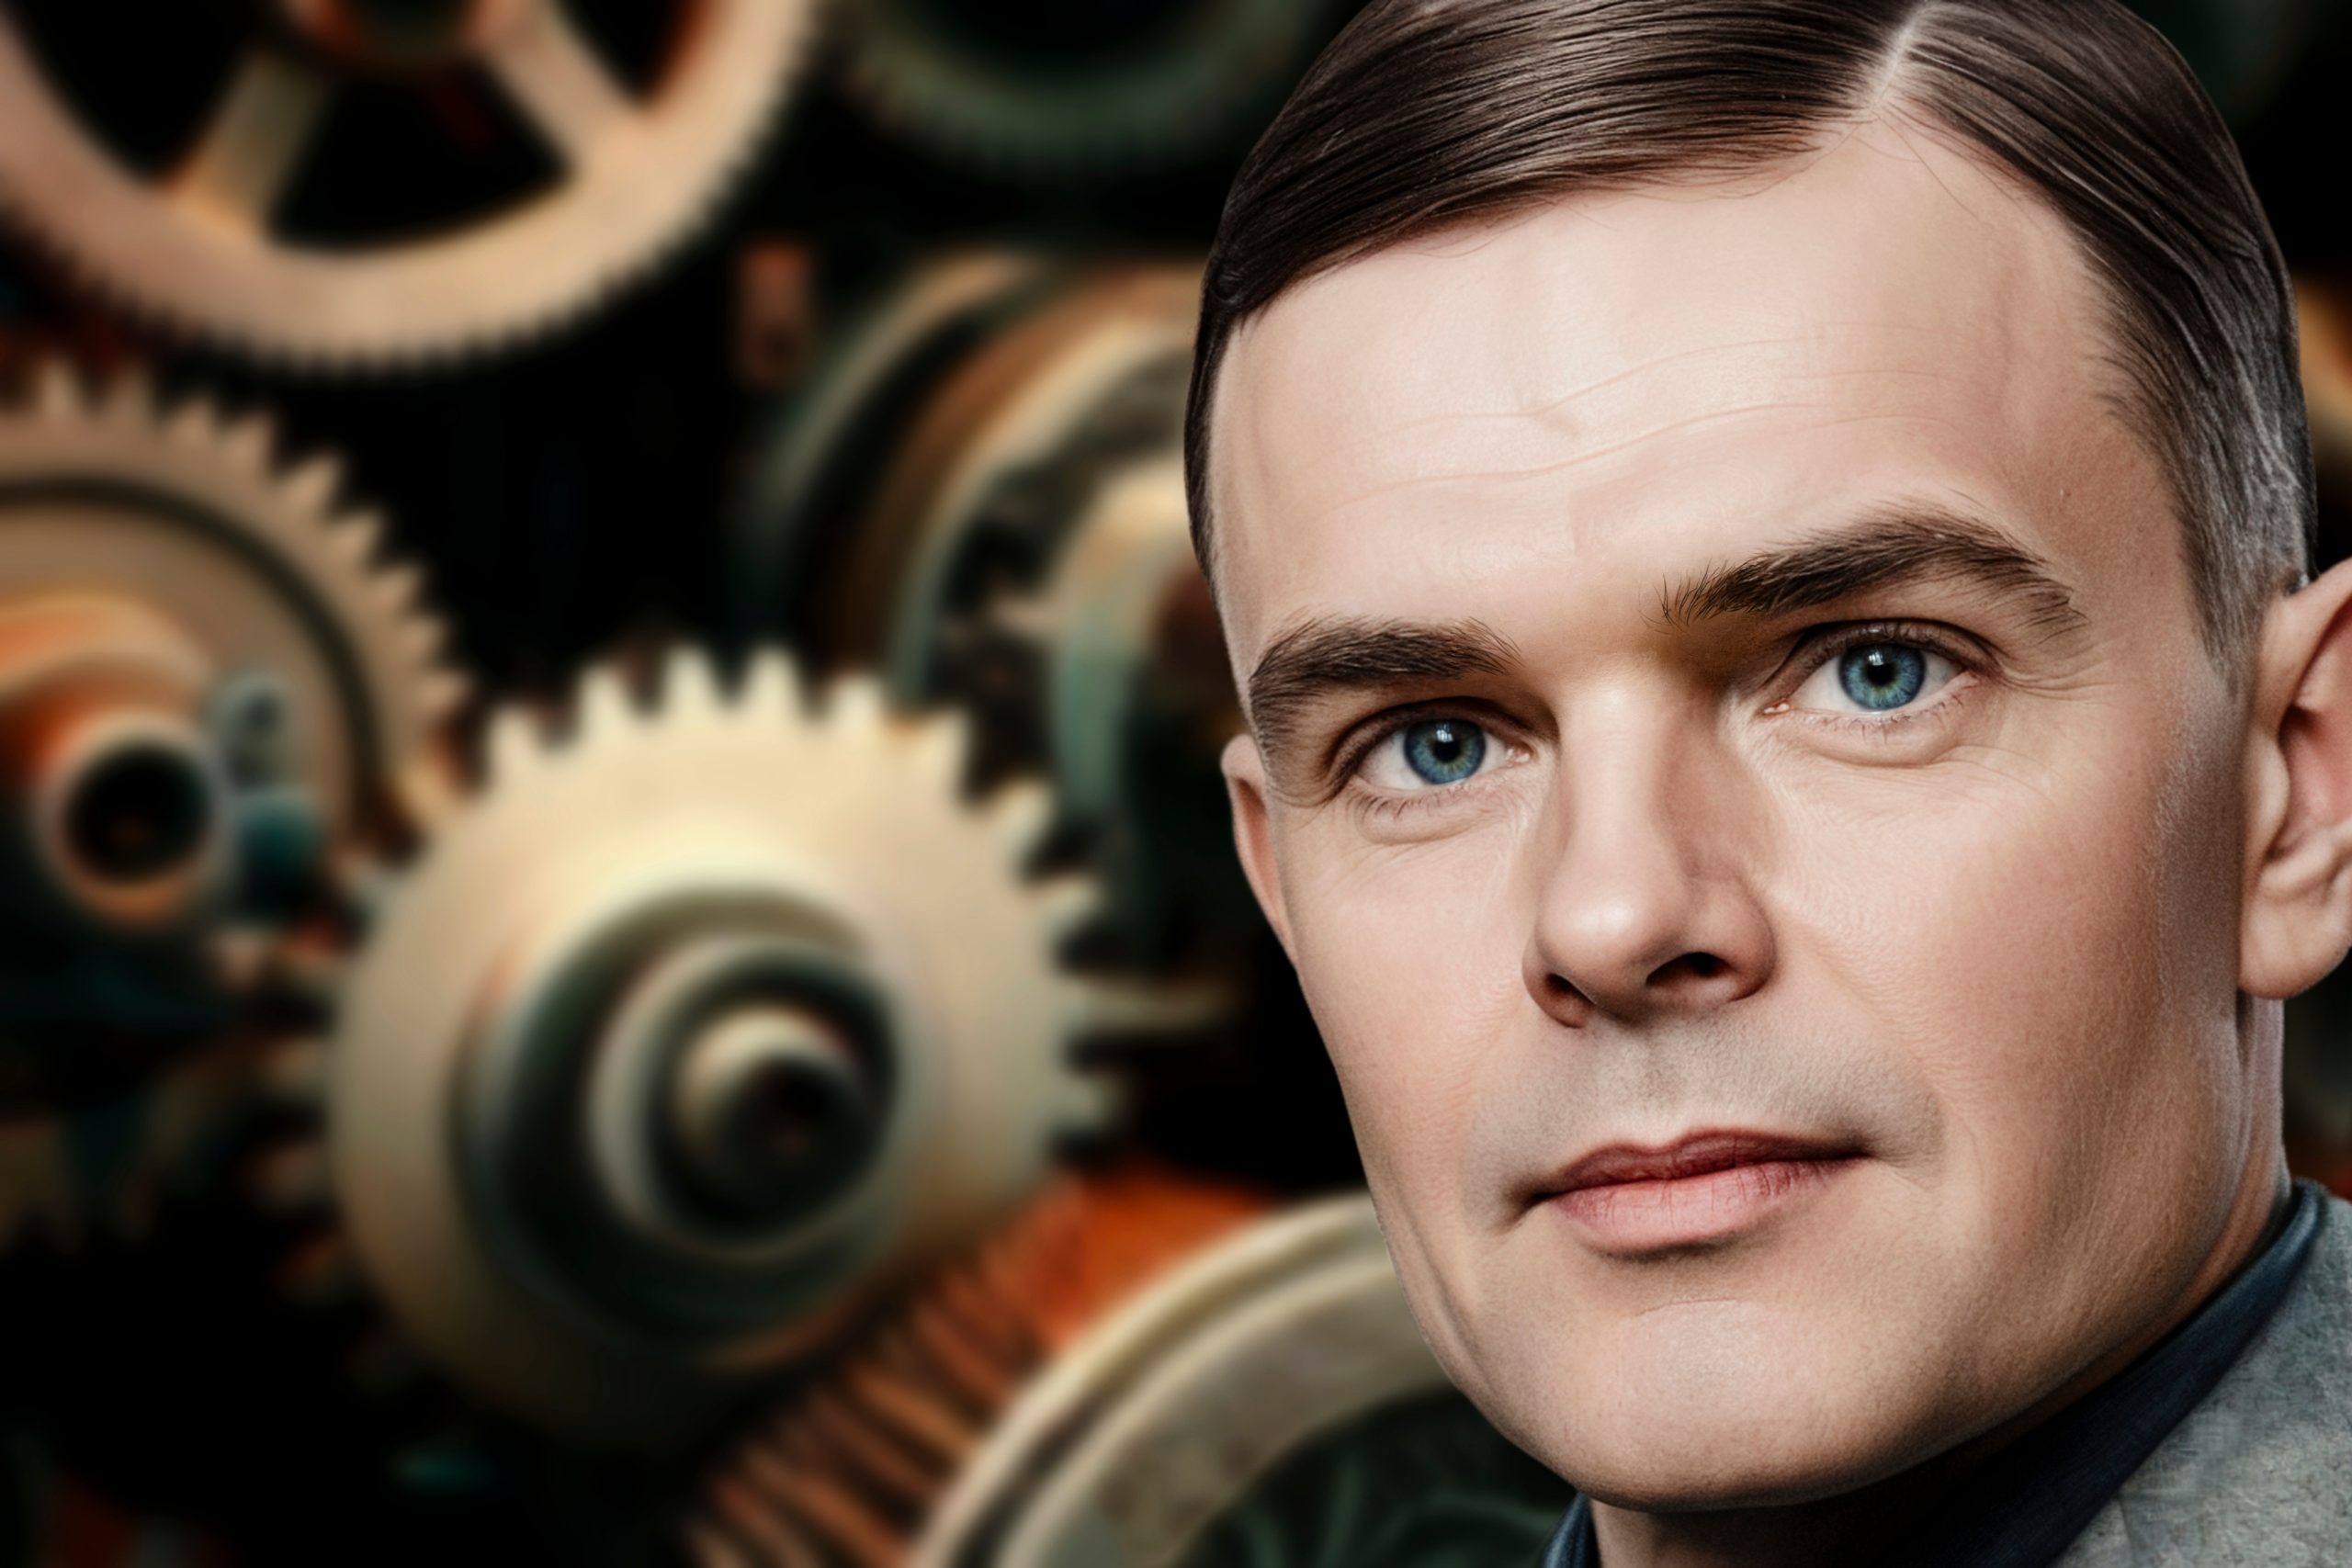 Turing test: explore the concept of machine intelligence